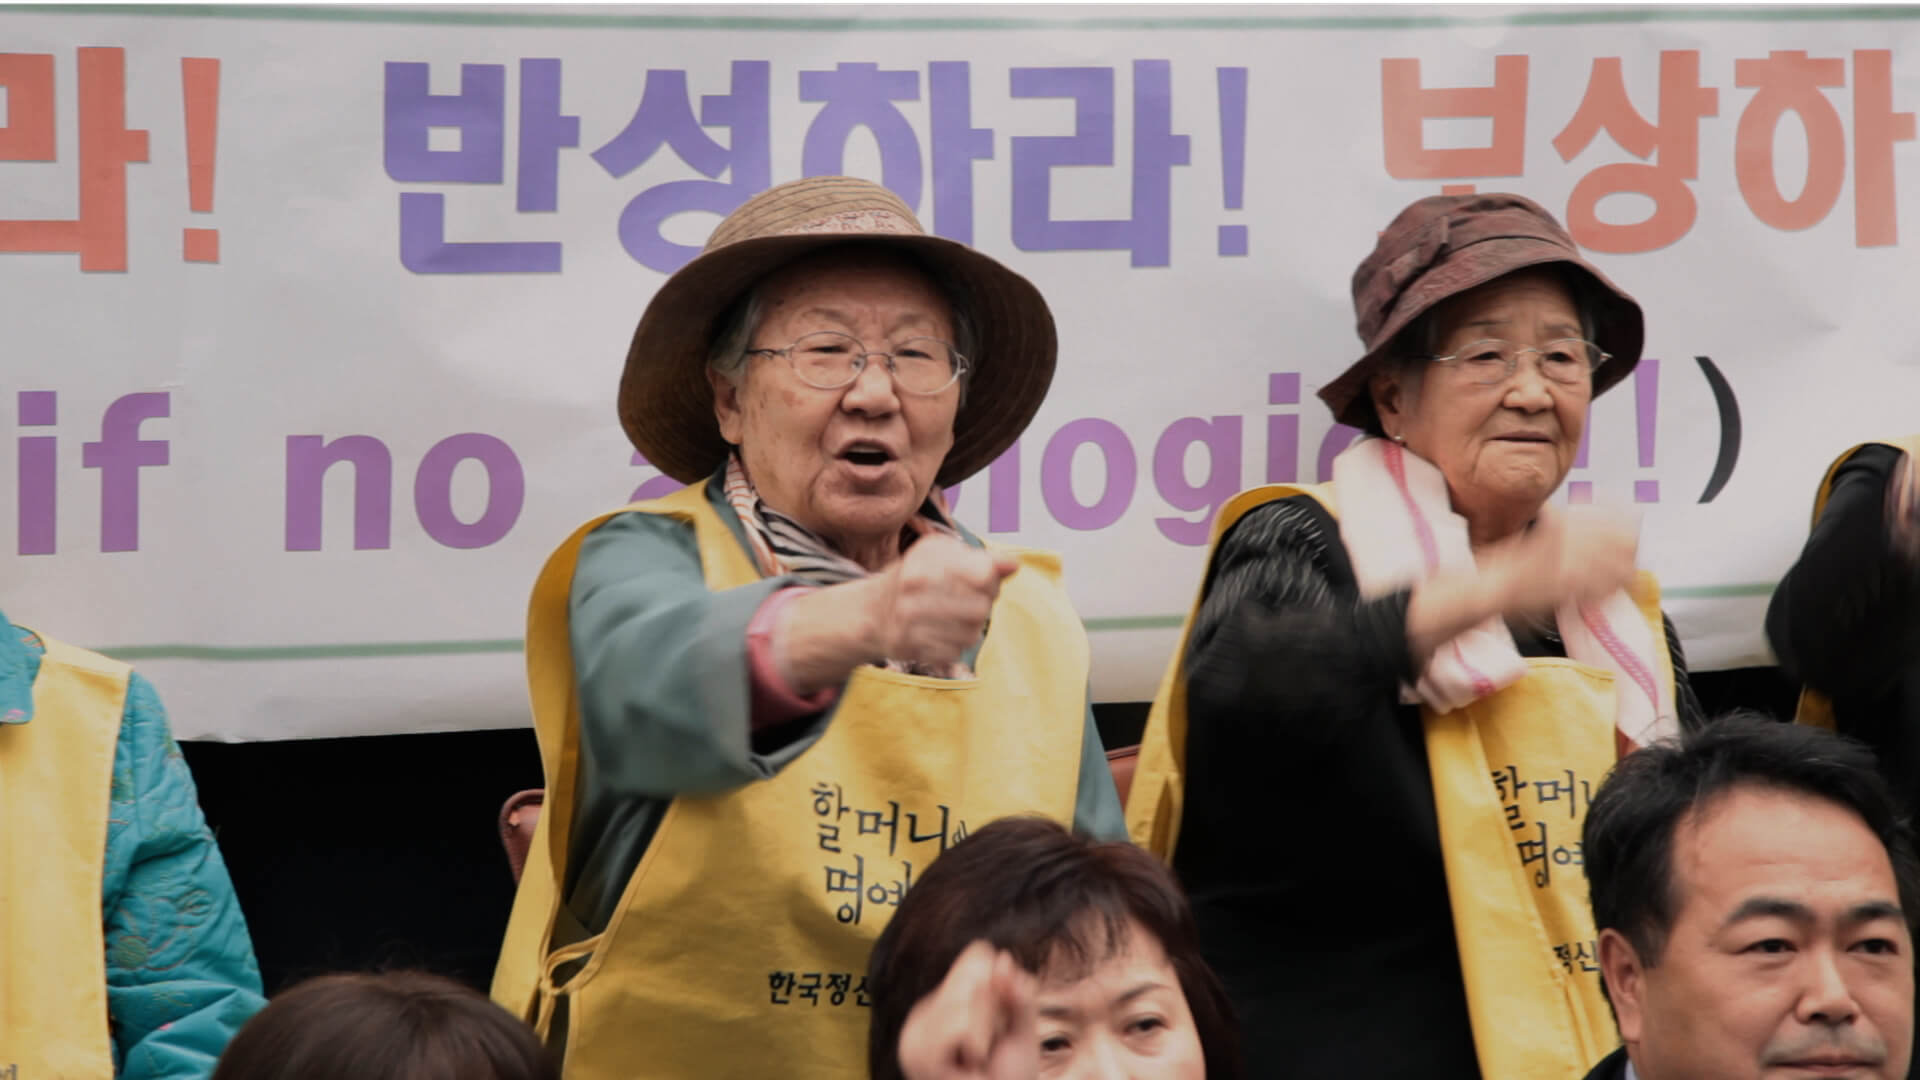 A still from The Apology. A person wearing a yellow smock with Korean text over the chest, a wide-brimmed straw hat, and glasses stands in front of a large banner also with Korean text. Their fist is raised pointing directly out in front of them.